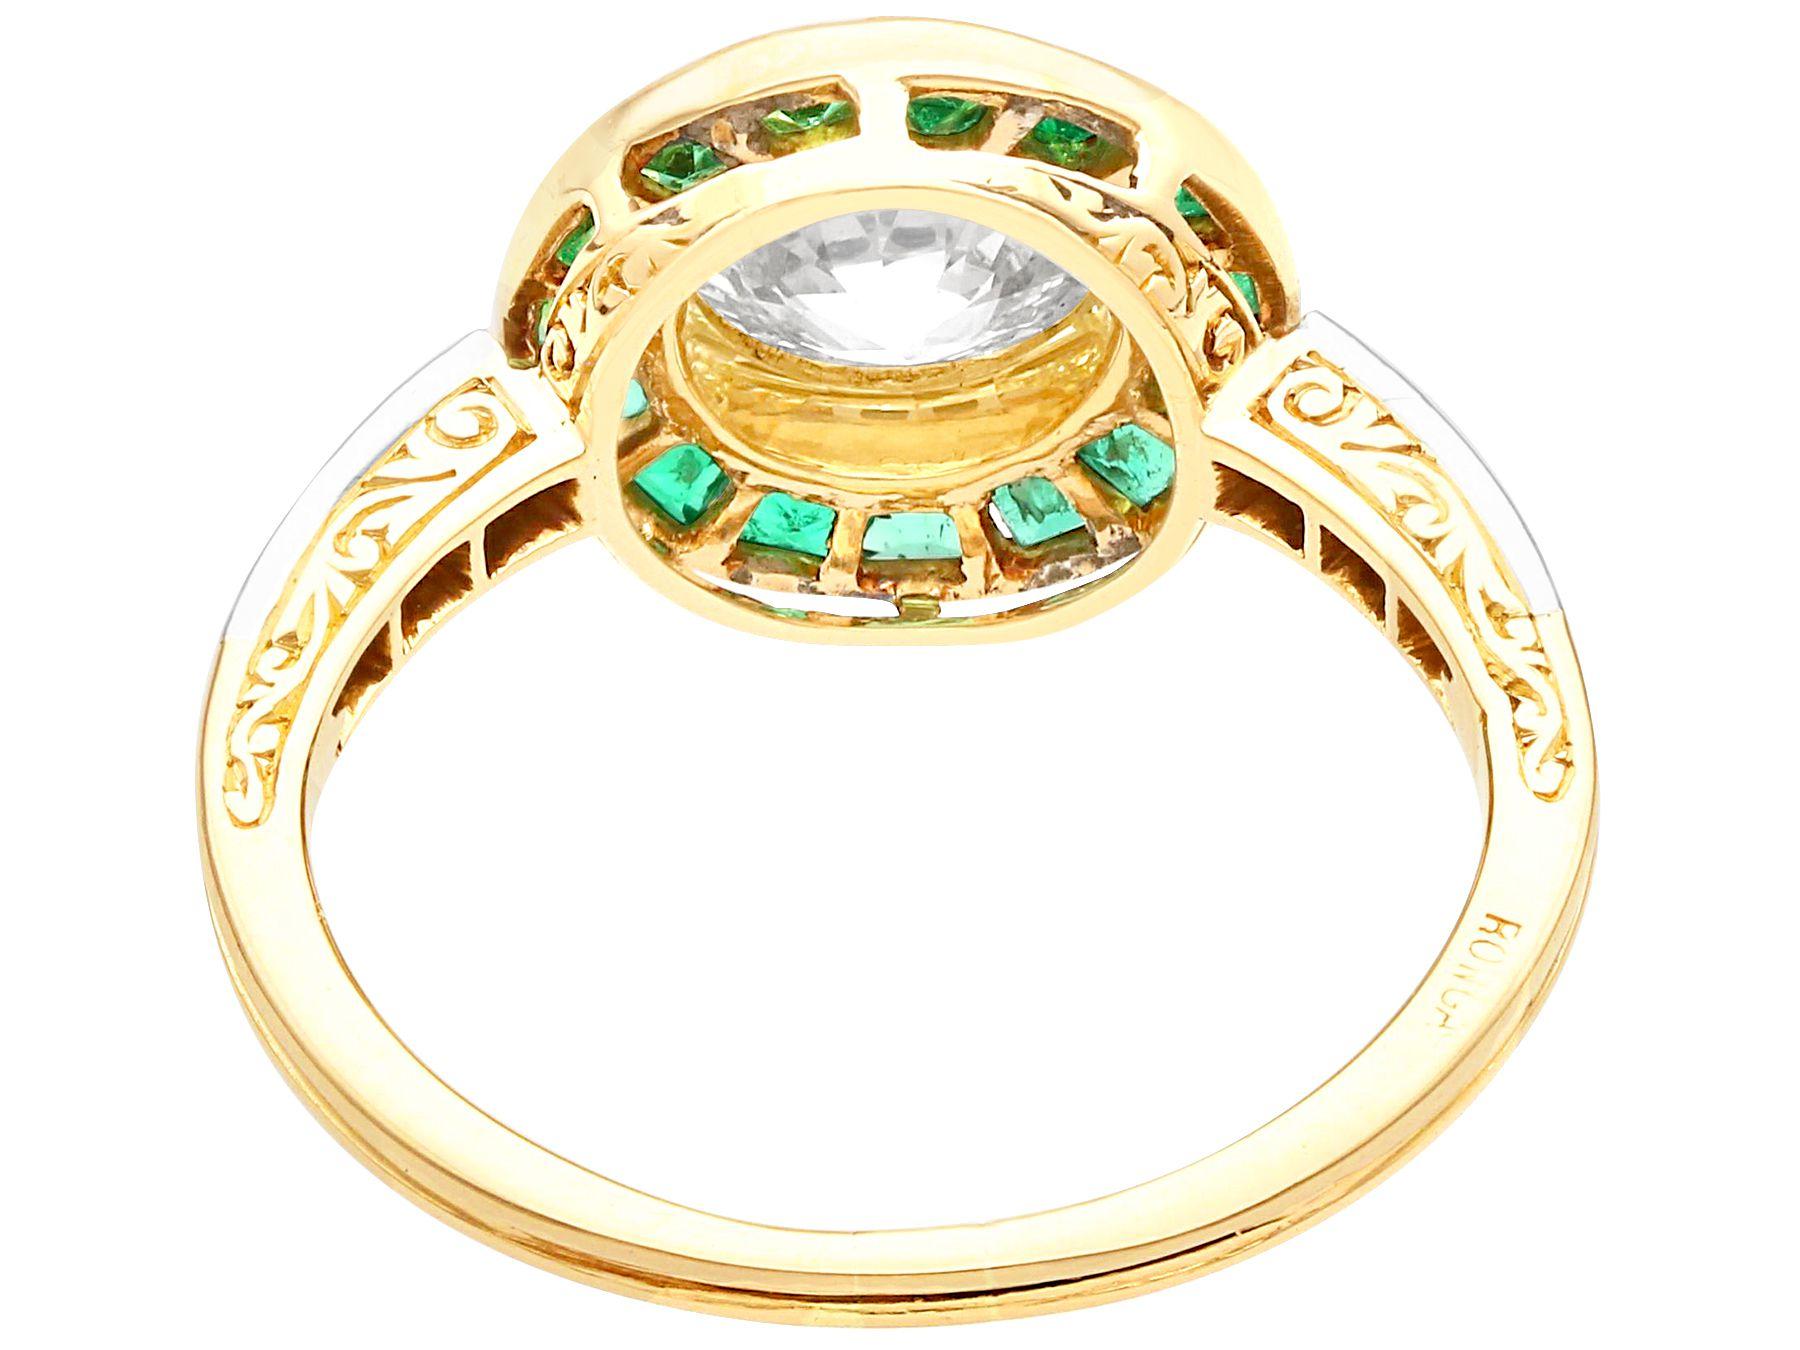 Old European Cut Antique 1.05Ct Emerald 1.18Ct Diamond Yellow Gold Ring, Circa 1930 For Sale